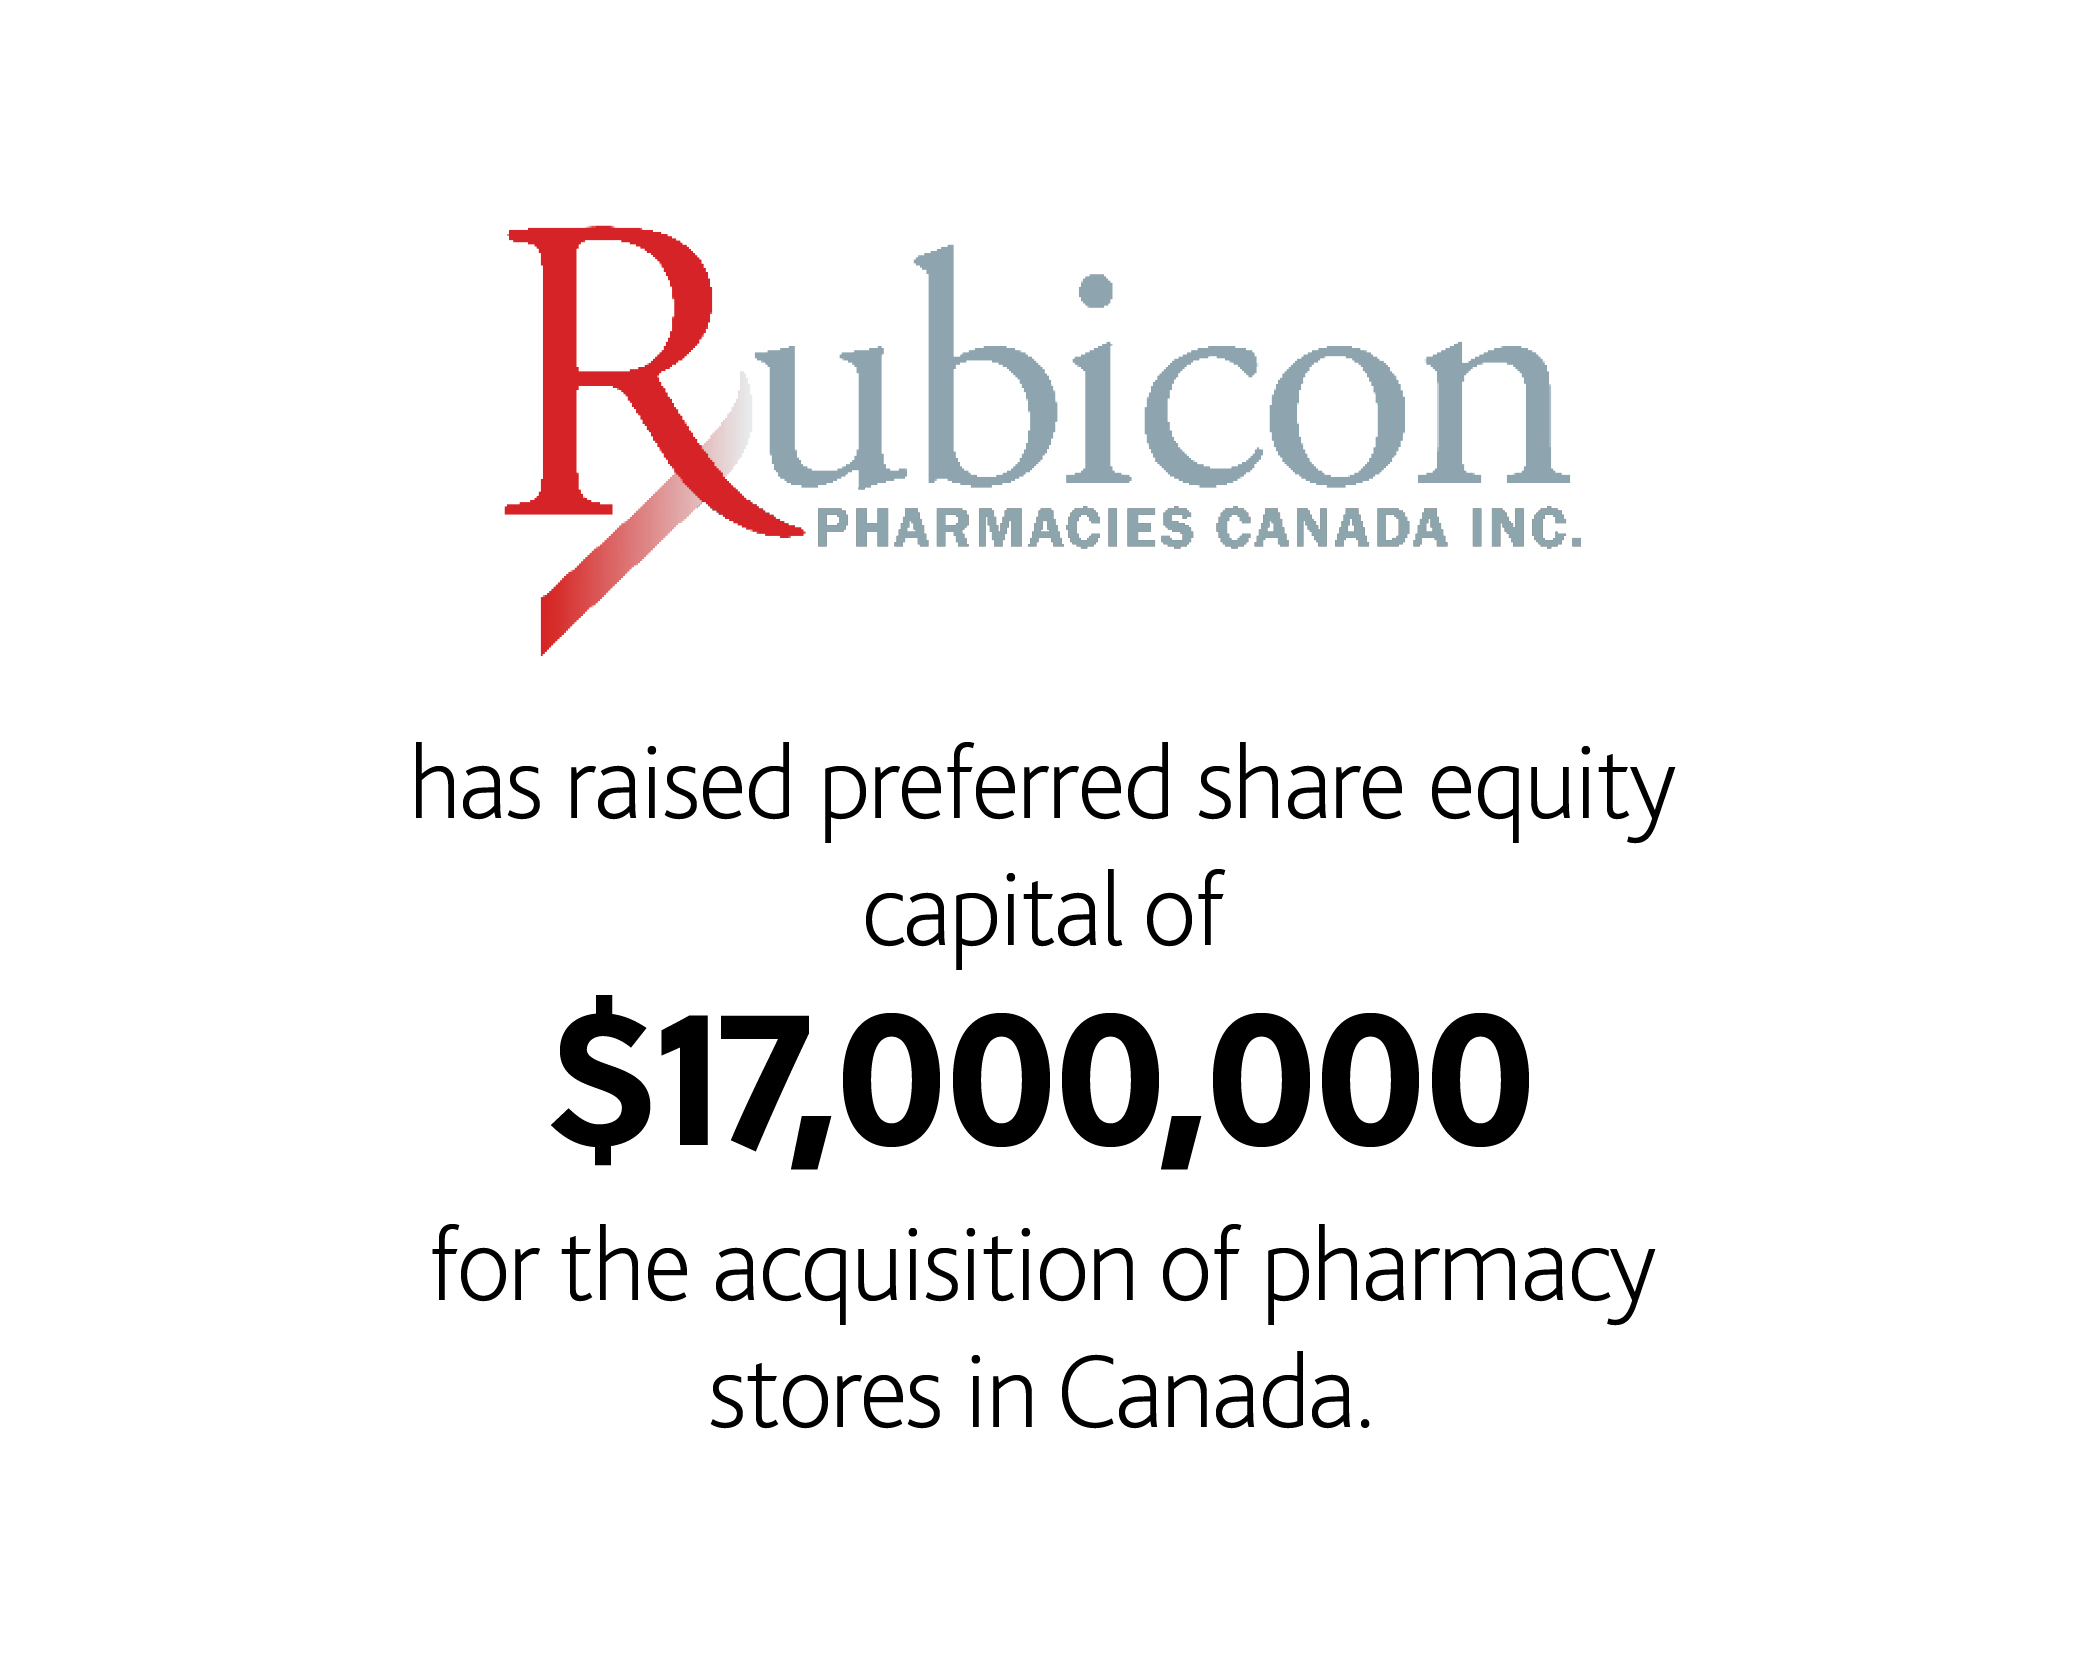 Rubicon Pharmacies Canada Inc. has raised preferred share equity capital of $17,000,000 for the acquisition of pharmacy stores in Canada